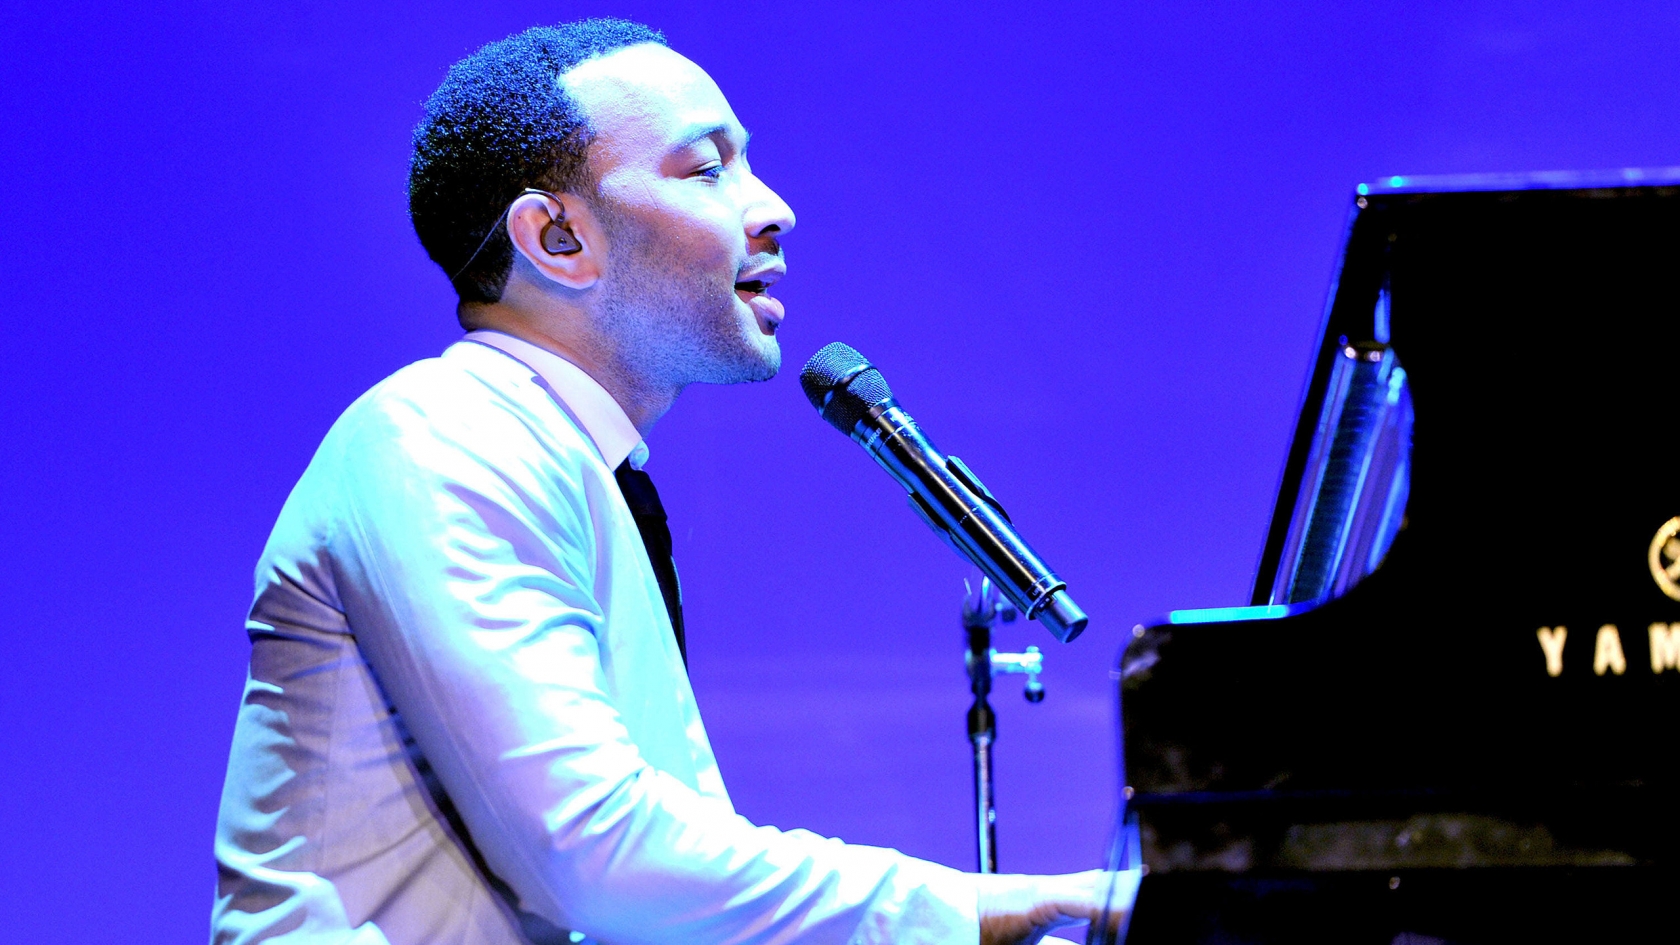 John Legend at Piano for 1680 x 945 HDTV resolution